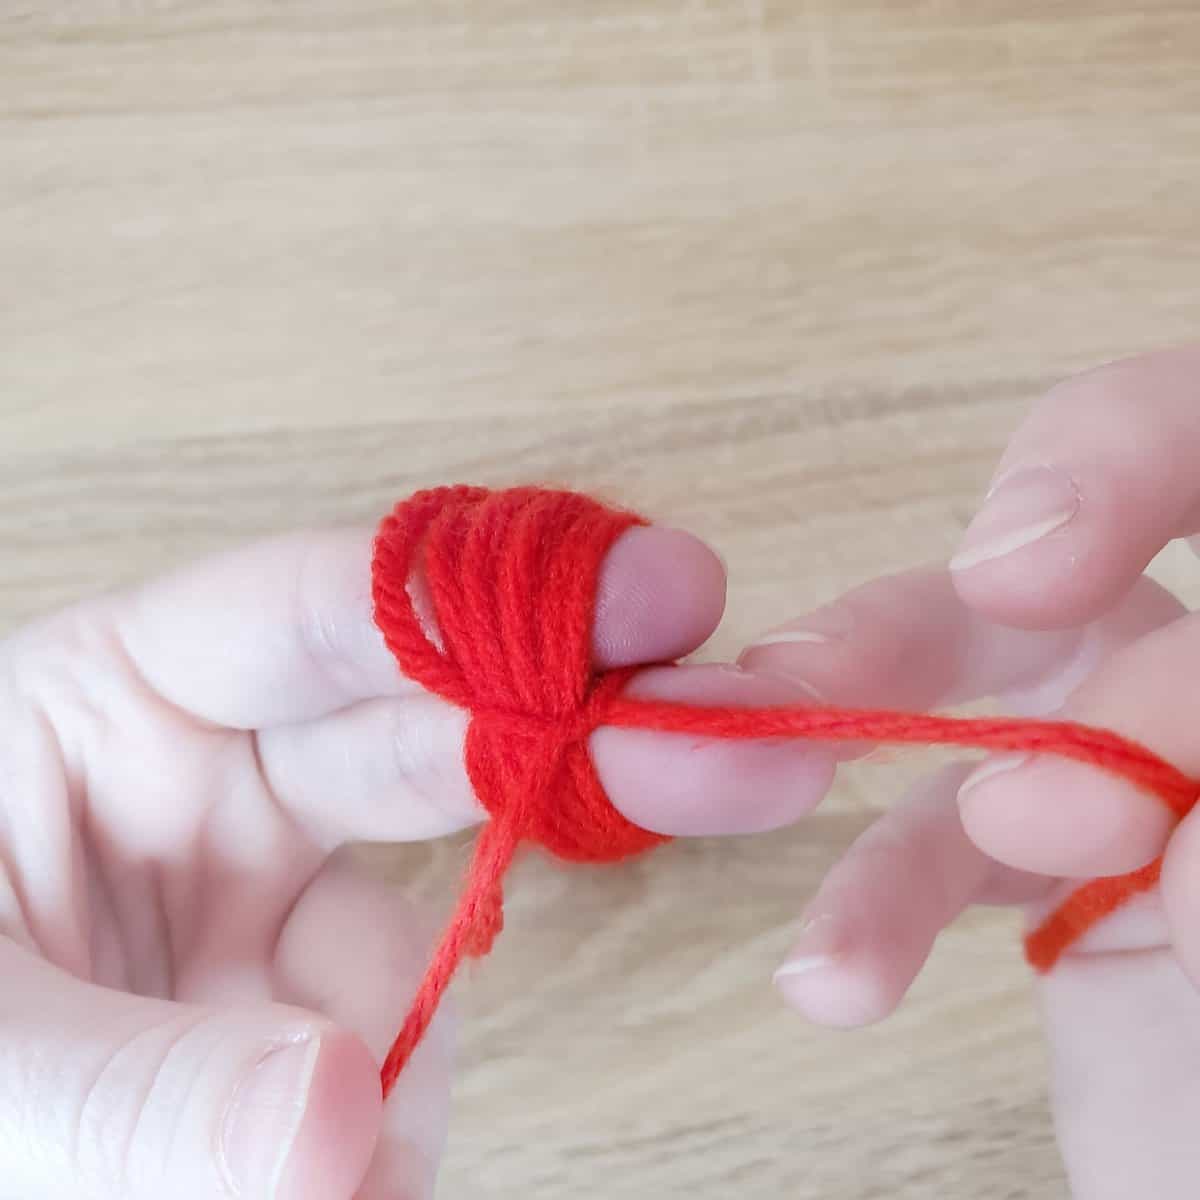 tying the two ends of the yarn